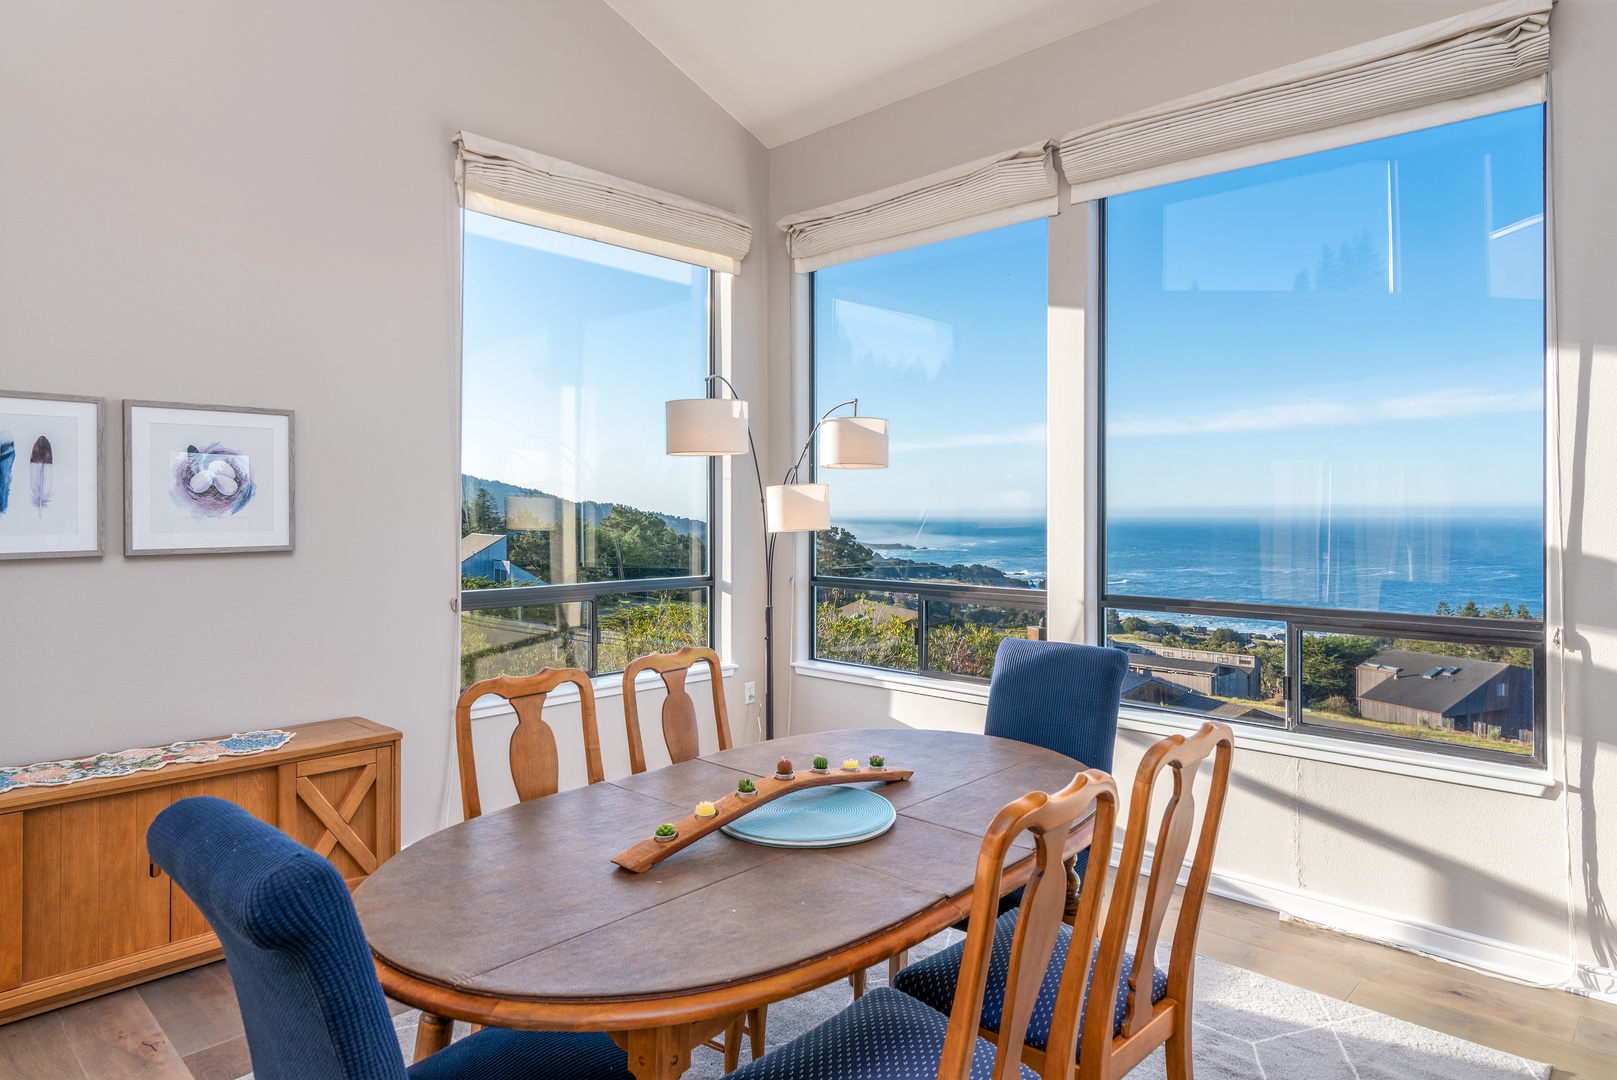 Ocean view dining table for 6